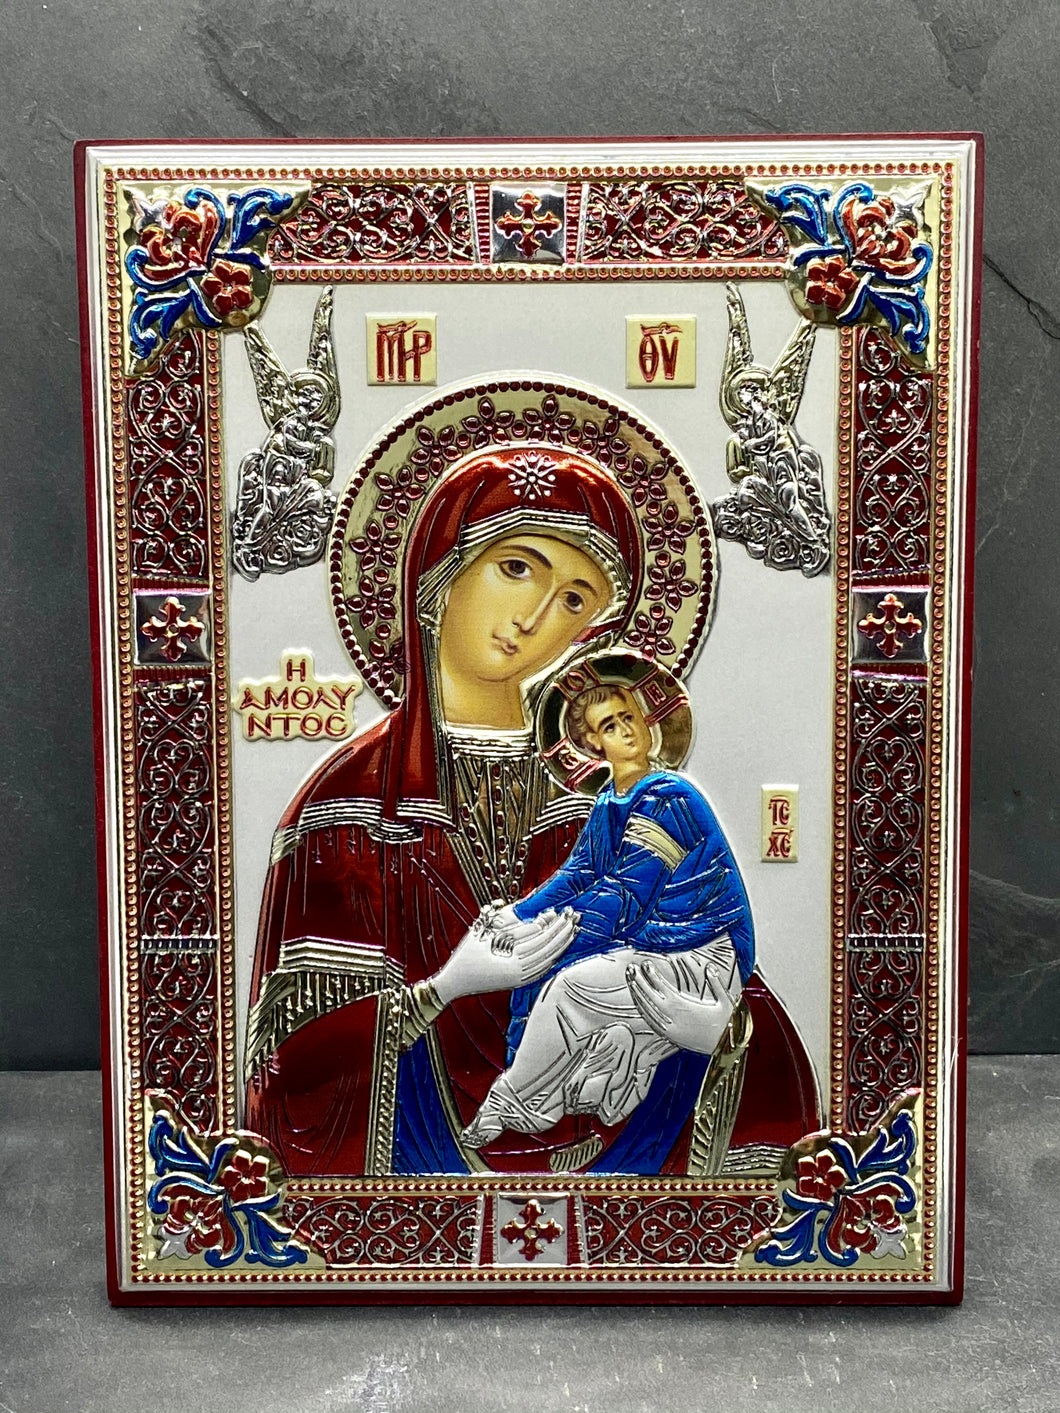 An original copy of Byzantine Holy Icon Amolyntos made with 925* Silver on Cherry Wood SI35